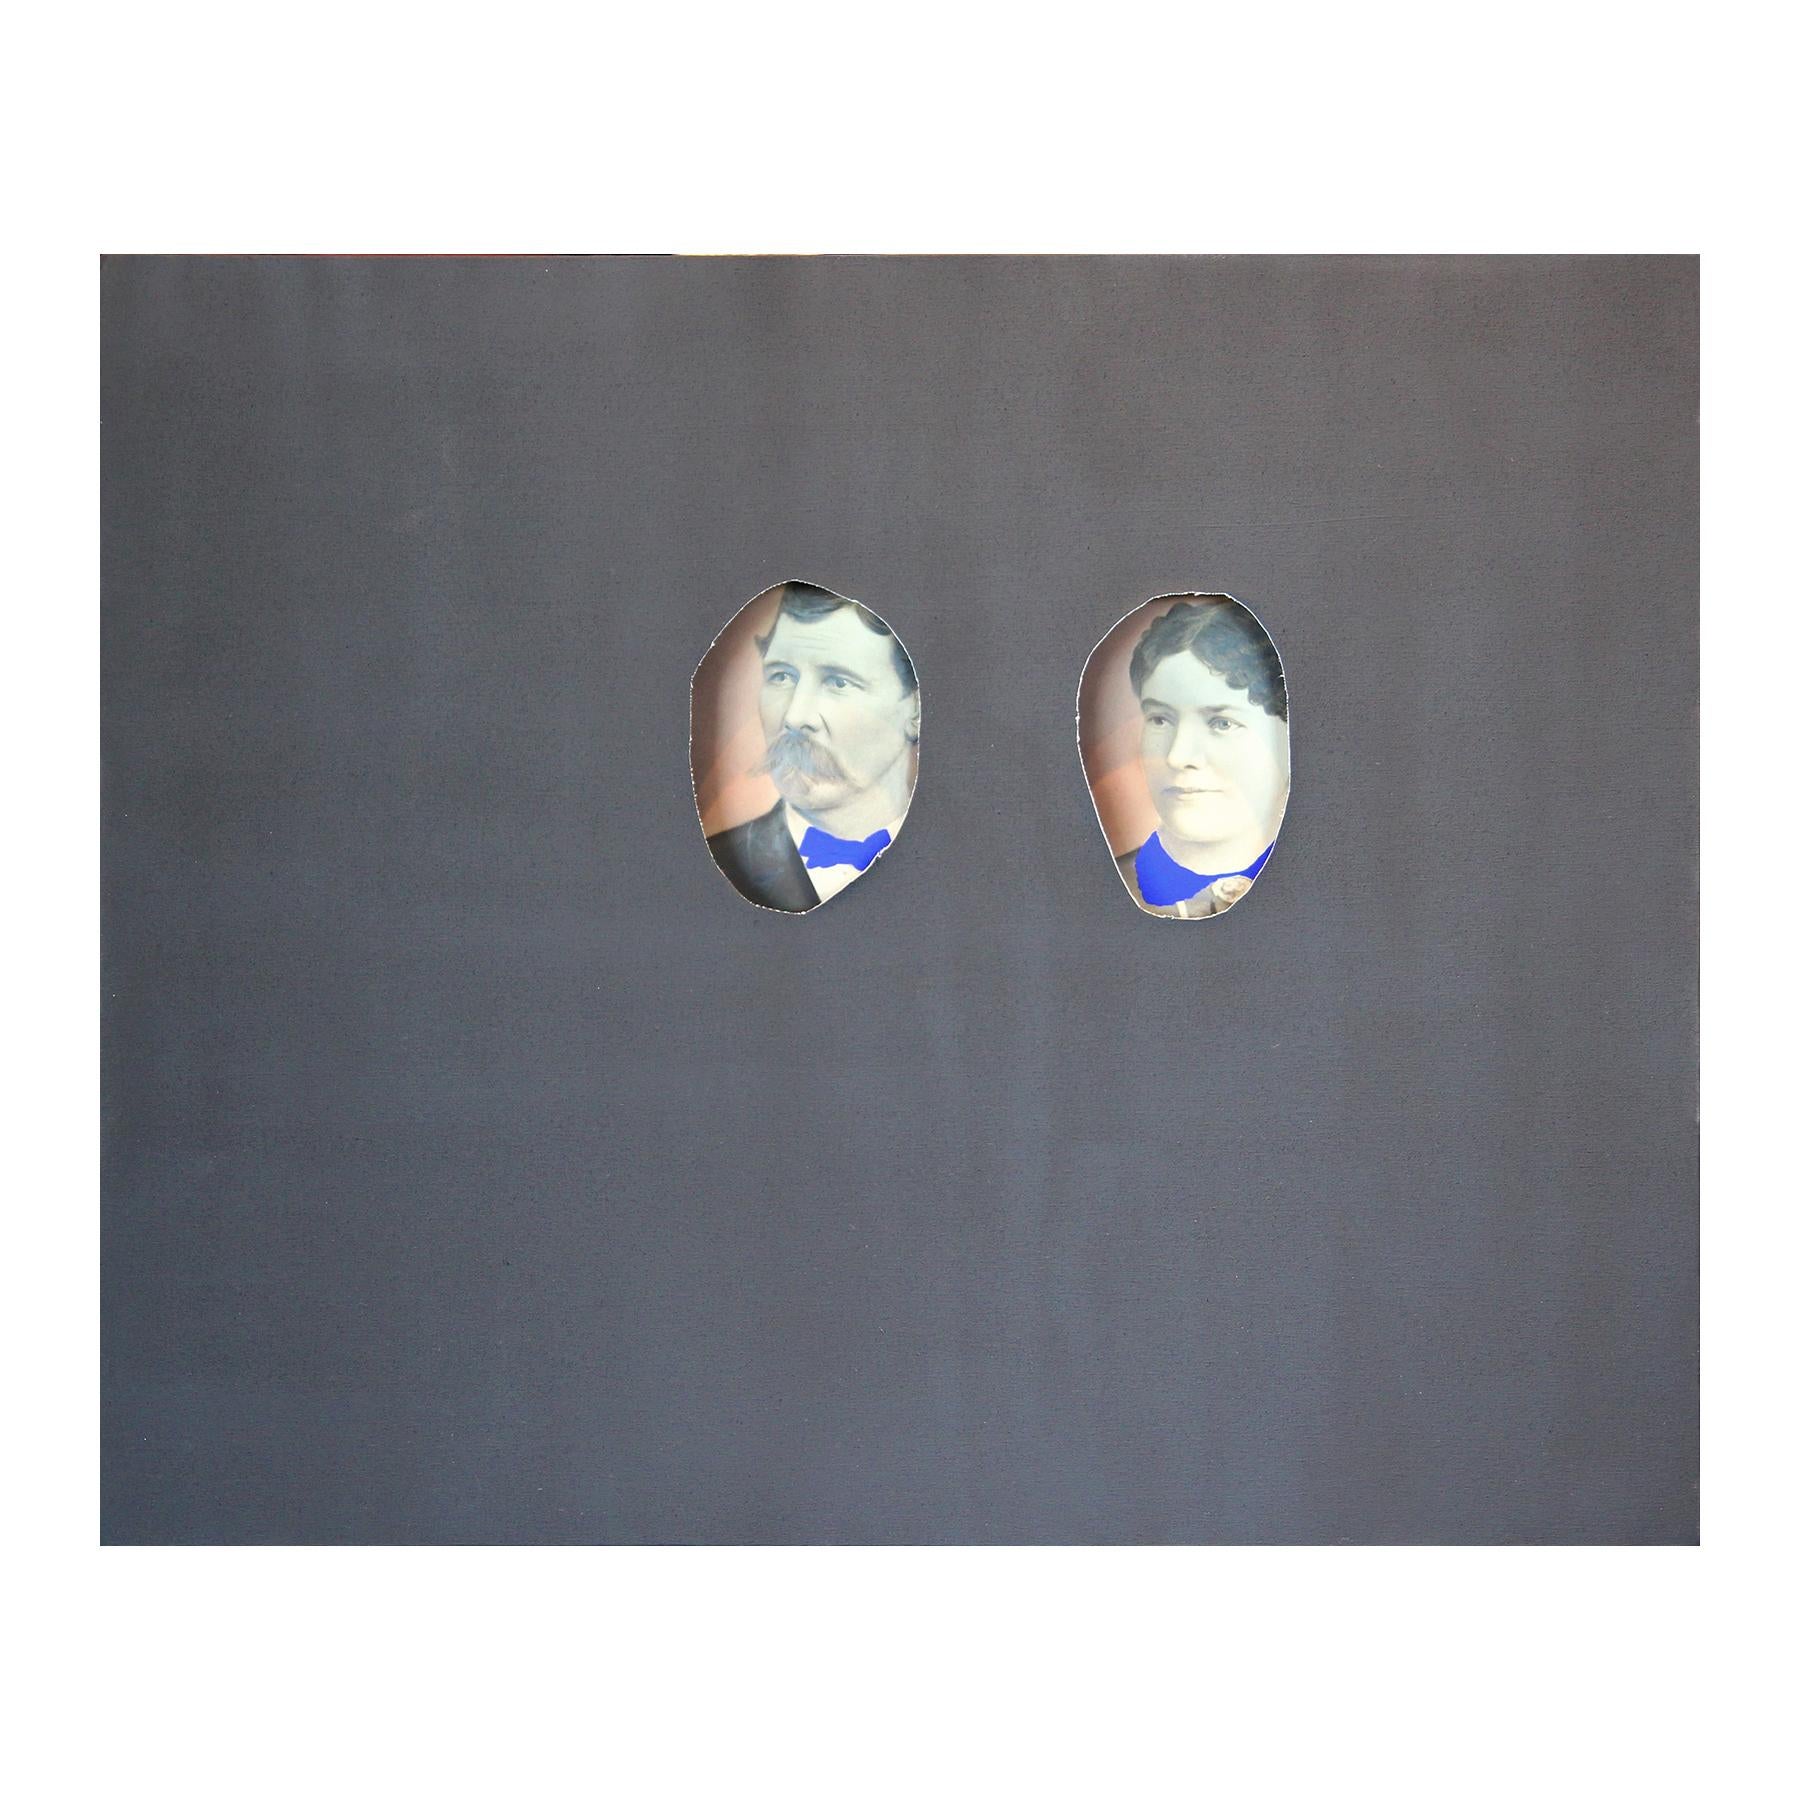 Matthew Reeves Portrait Painting - Black Canvas Wrapped Portrait of a Couple with Painted Bright Blue Collars